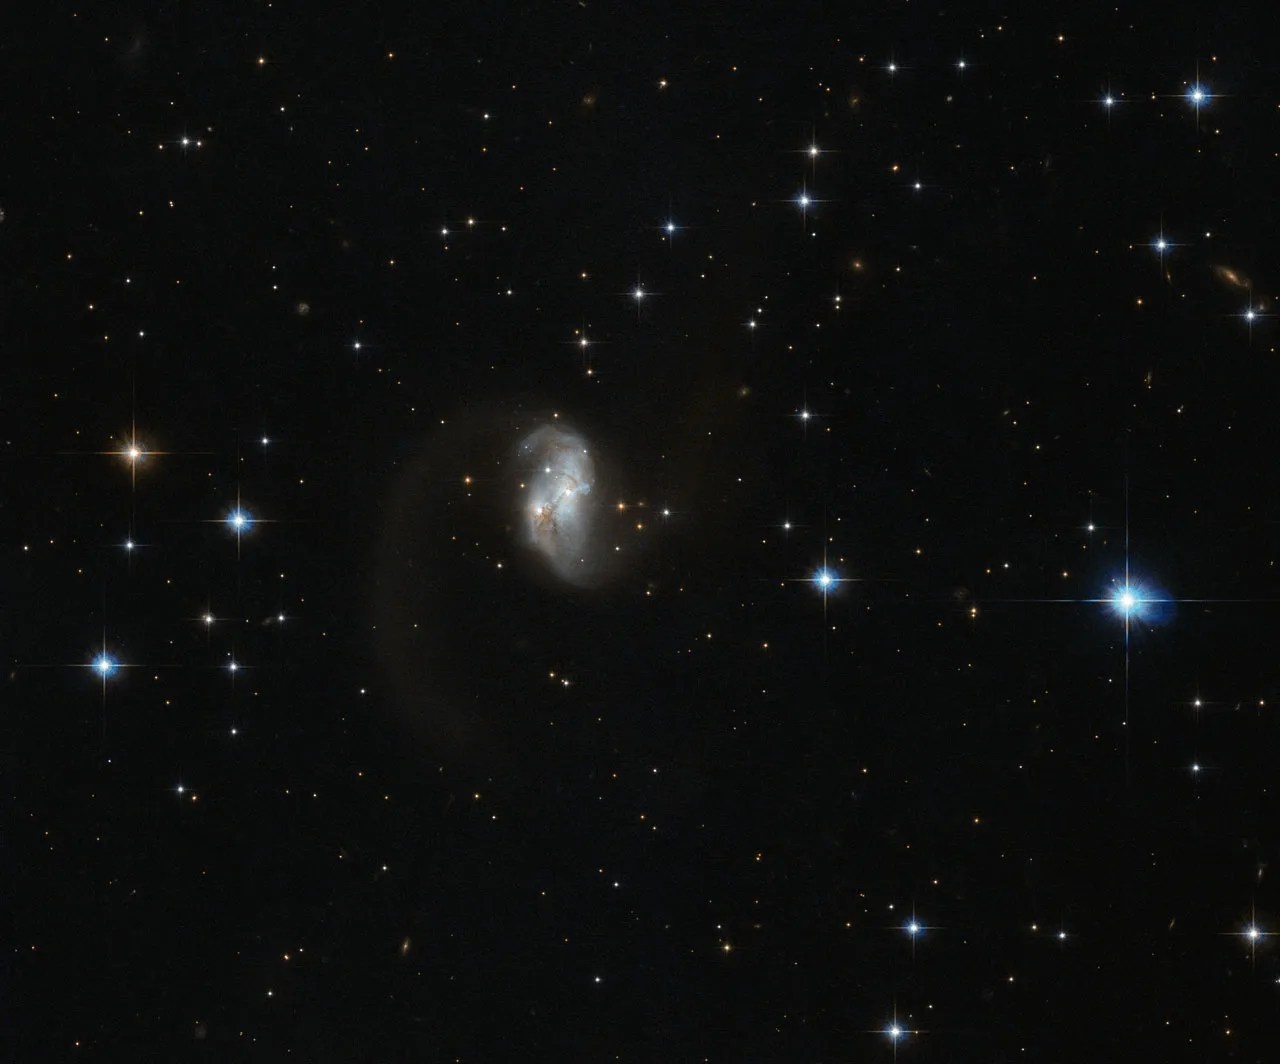 The central portion of this spiral galaxy is the only part visible, giving it an asymmetric form with a tail